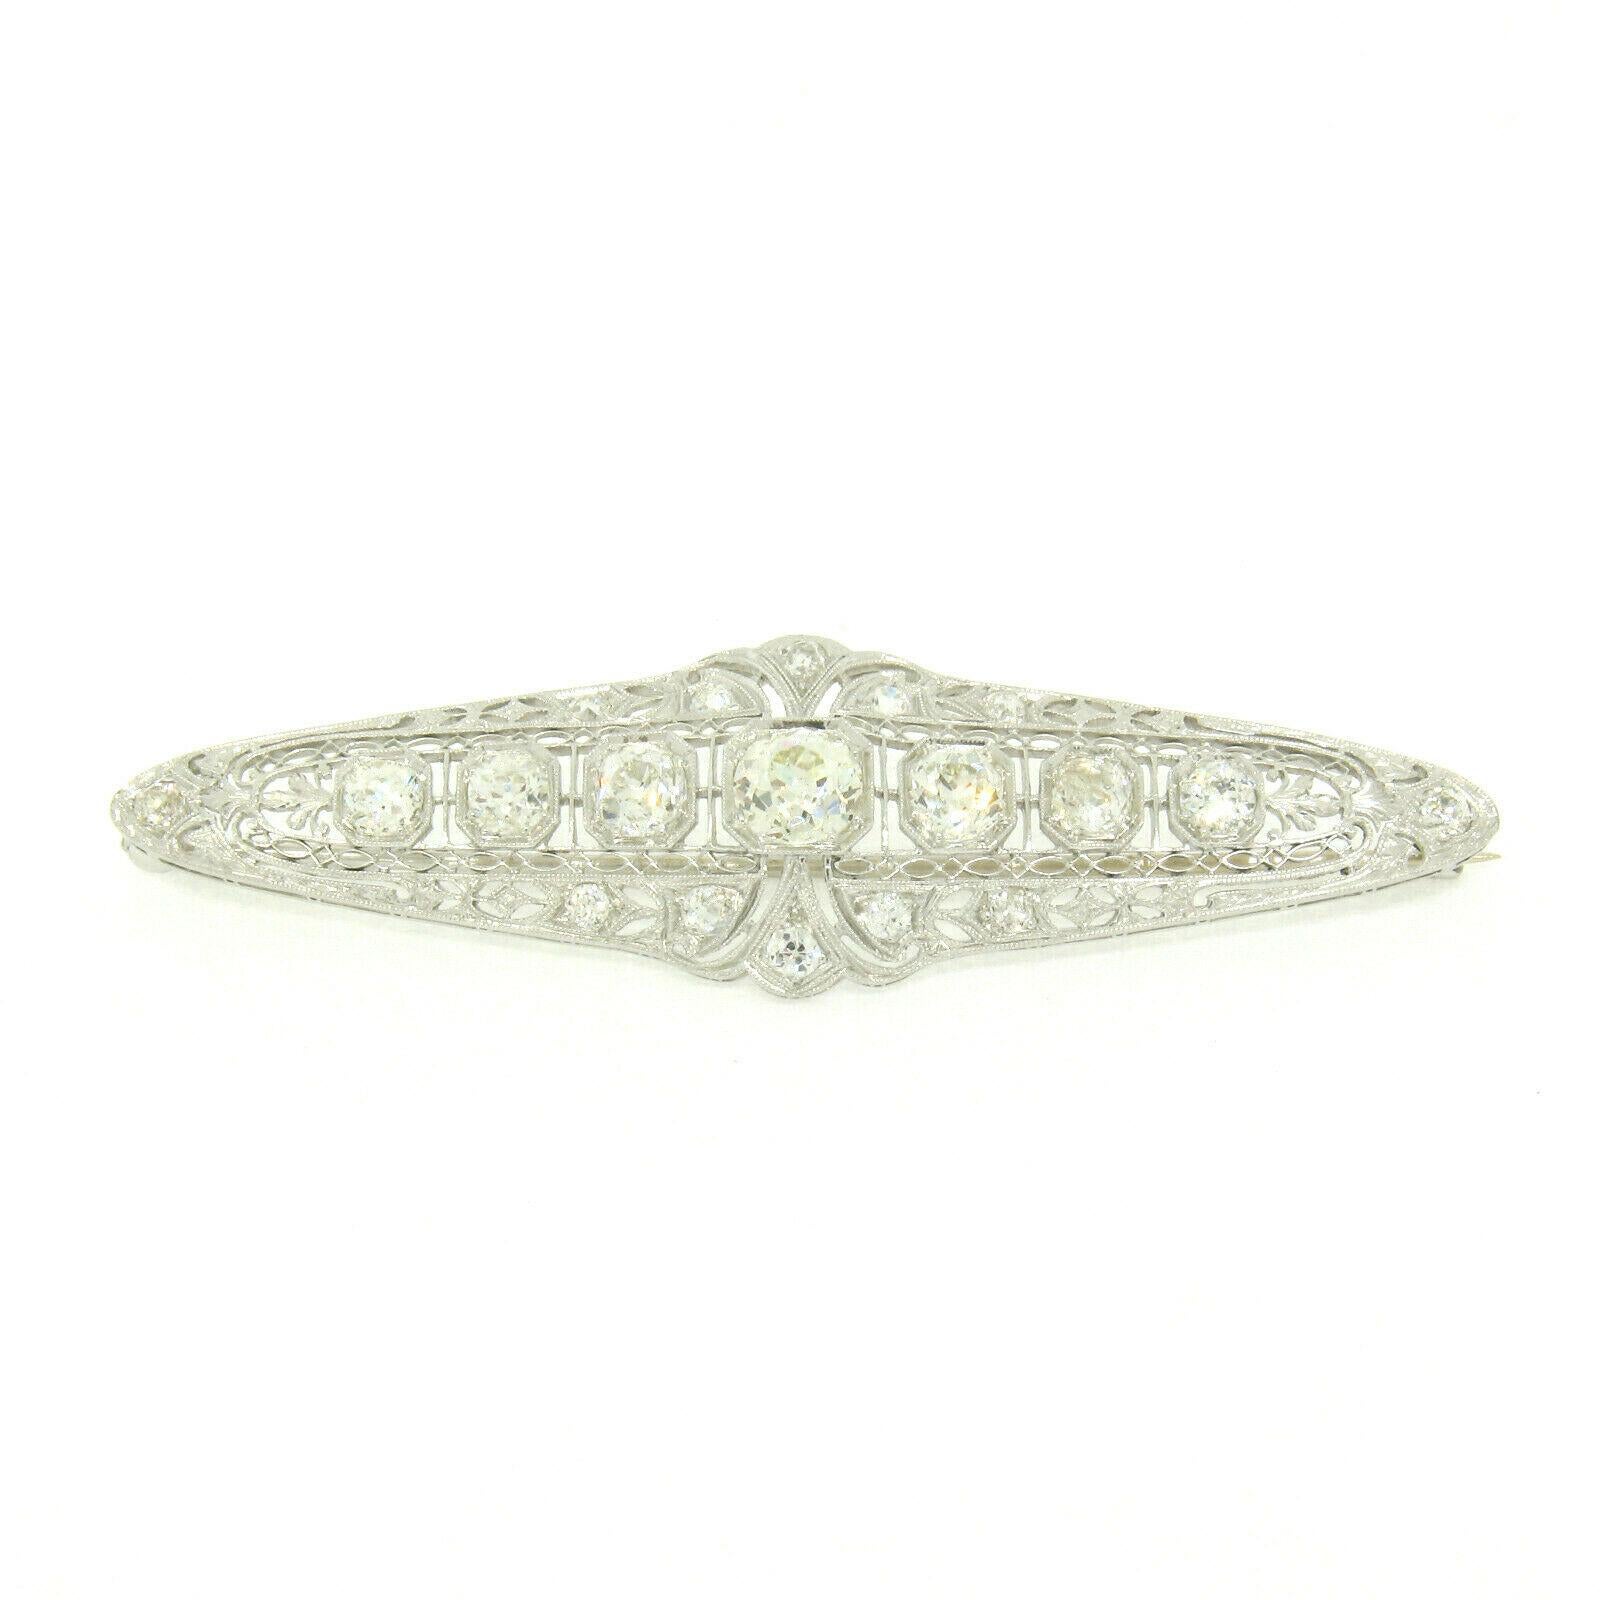 Art Deco Platinum 6.0 Carat Old Euro and Mine Cut Diamond Filigree Brooch Pin In Excellent Condition For Sale In Montclair, NJ